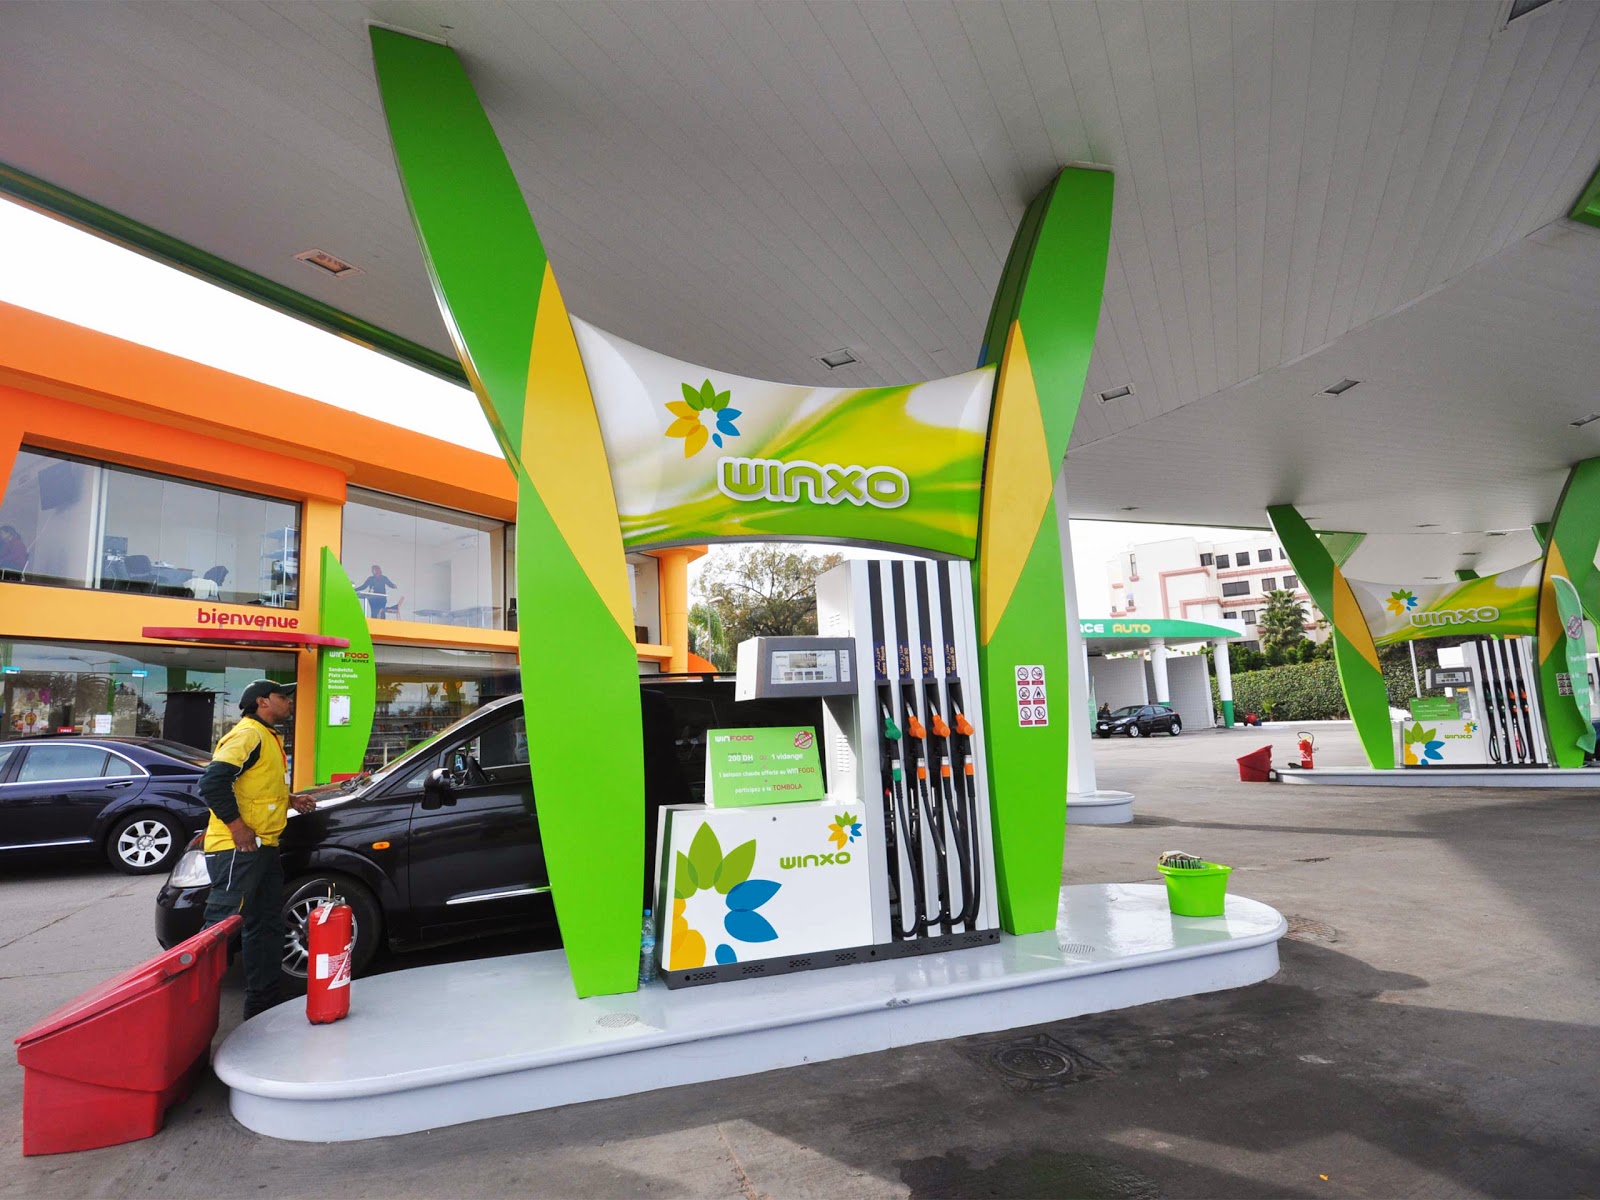 A bold reimaging of both the forecourt and shop identity was necessary to challenge incumbents Shell, Total and Afriquia and to position Winxo as a local brand of international repute.